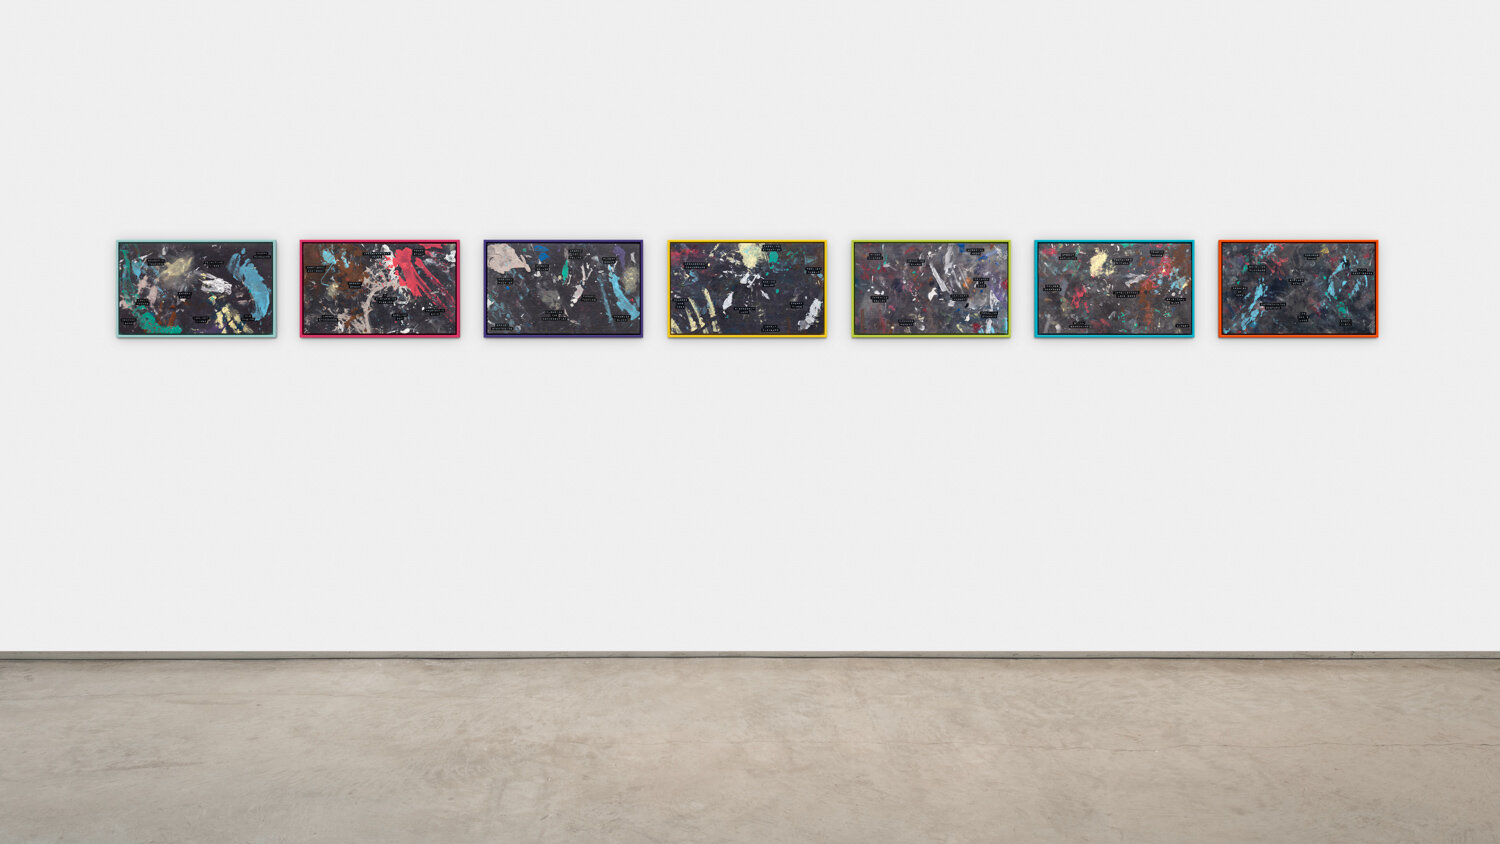 The Greatest Abstract Painting of All Time 2019 #1 - 7, Installation view